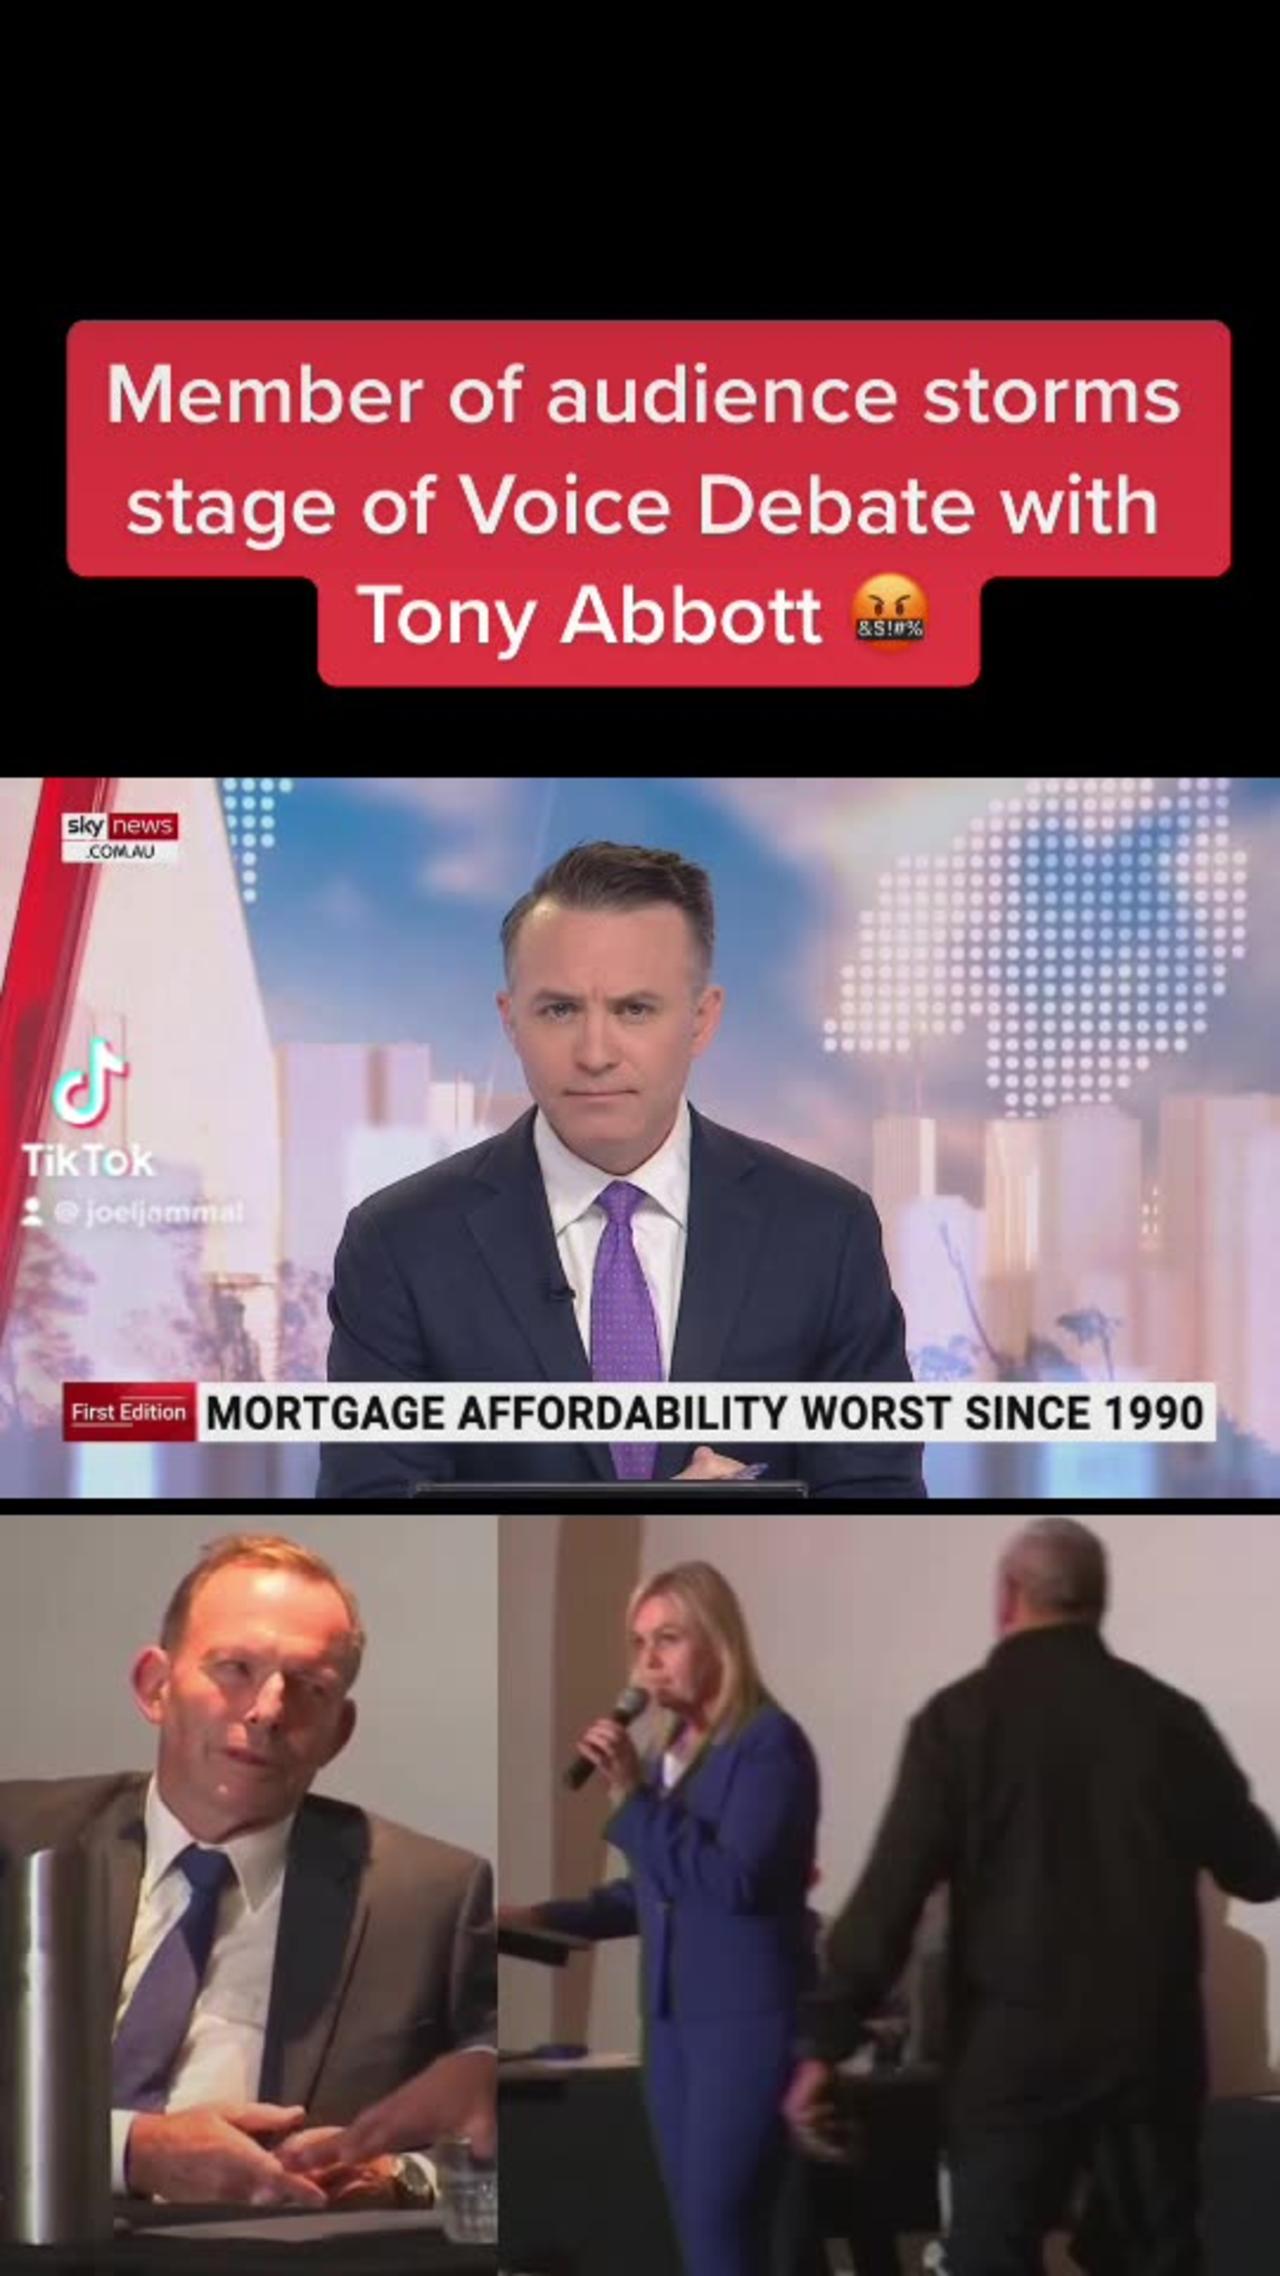 Member of audience storms stage of Voice Debate with Tony Abbott 🤬 #TheVoice #TonyAbbott